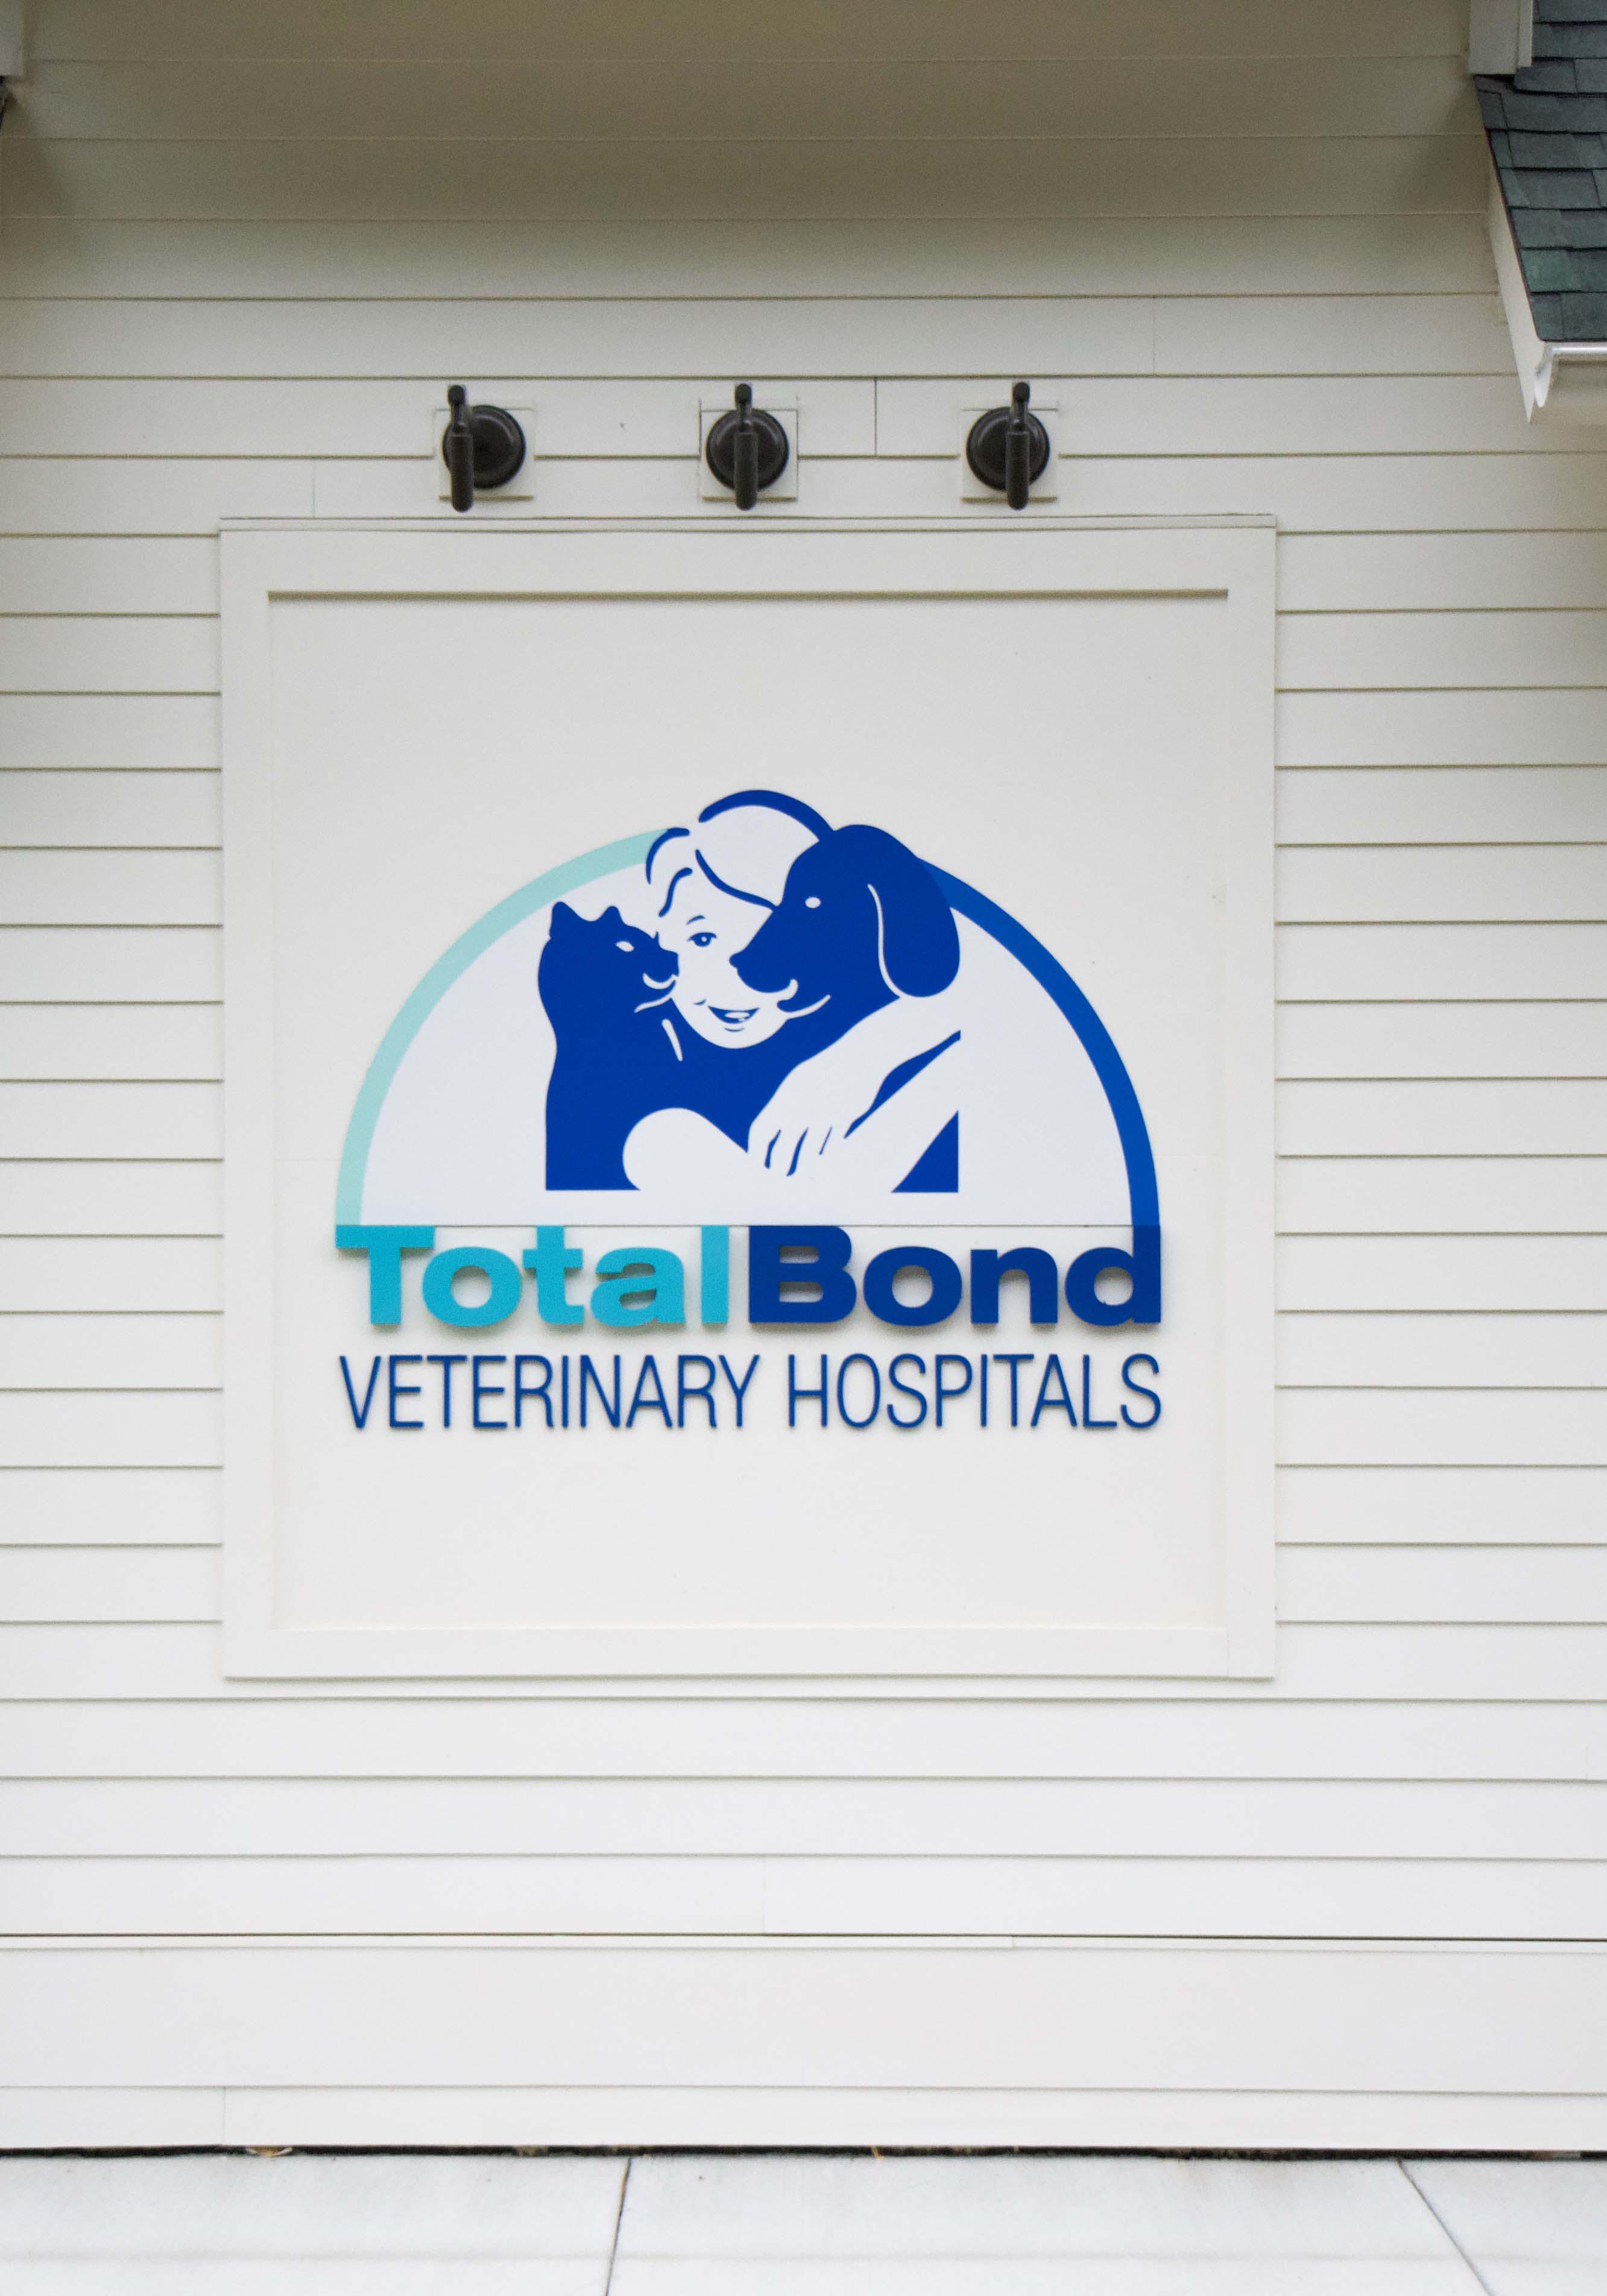 Welcome to TotalBond Veterinary Hospital at Davidson!